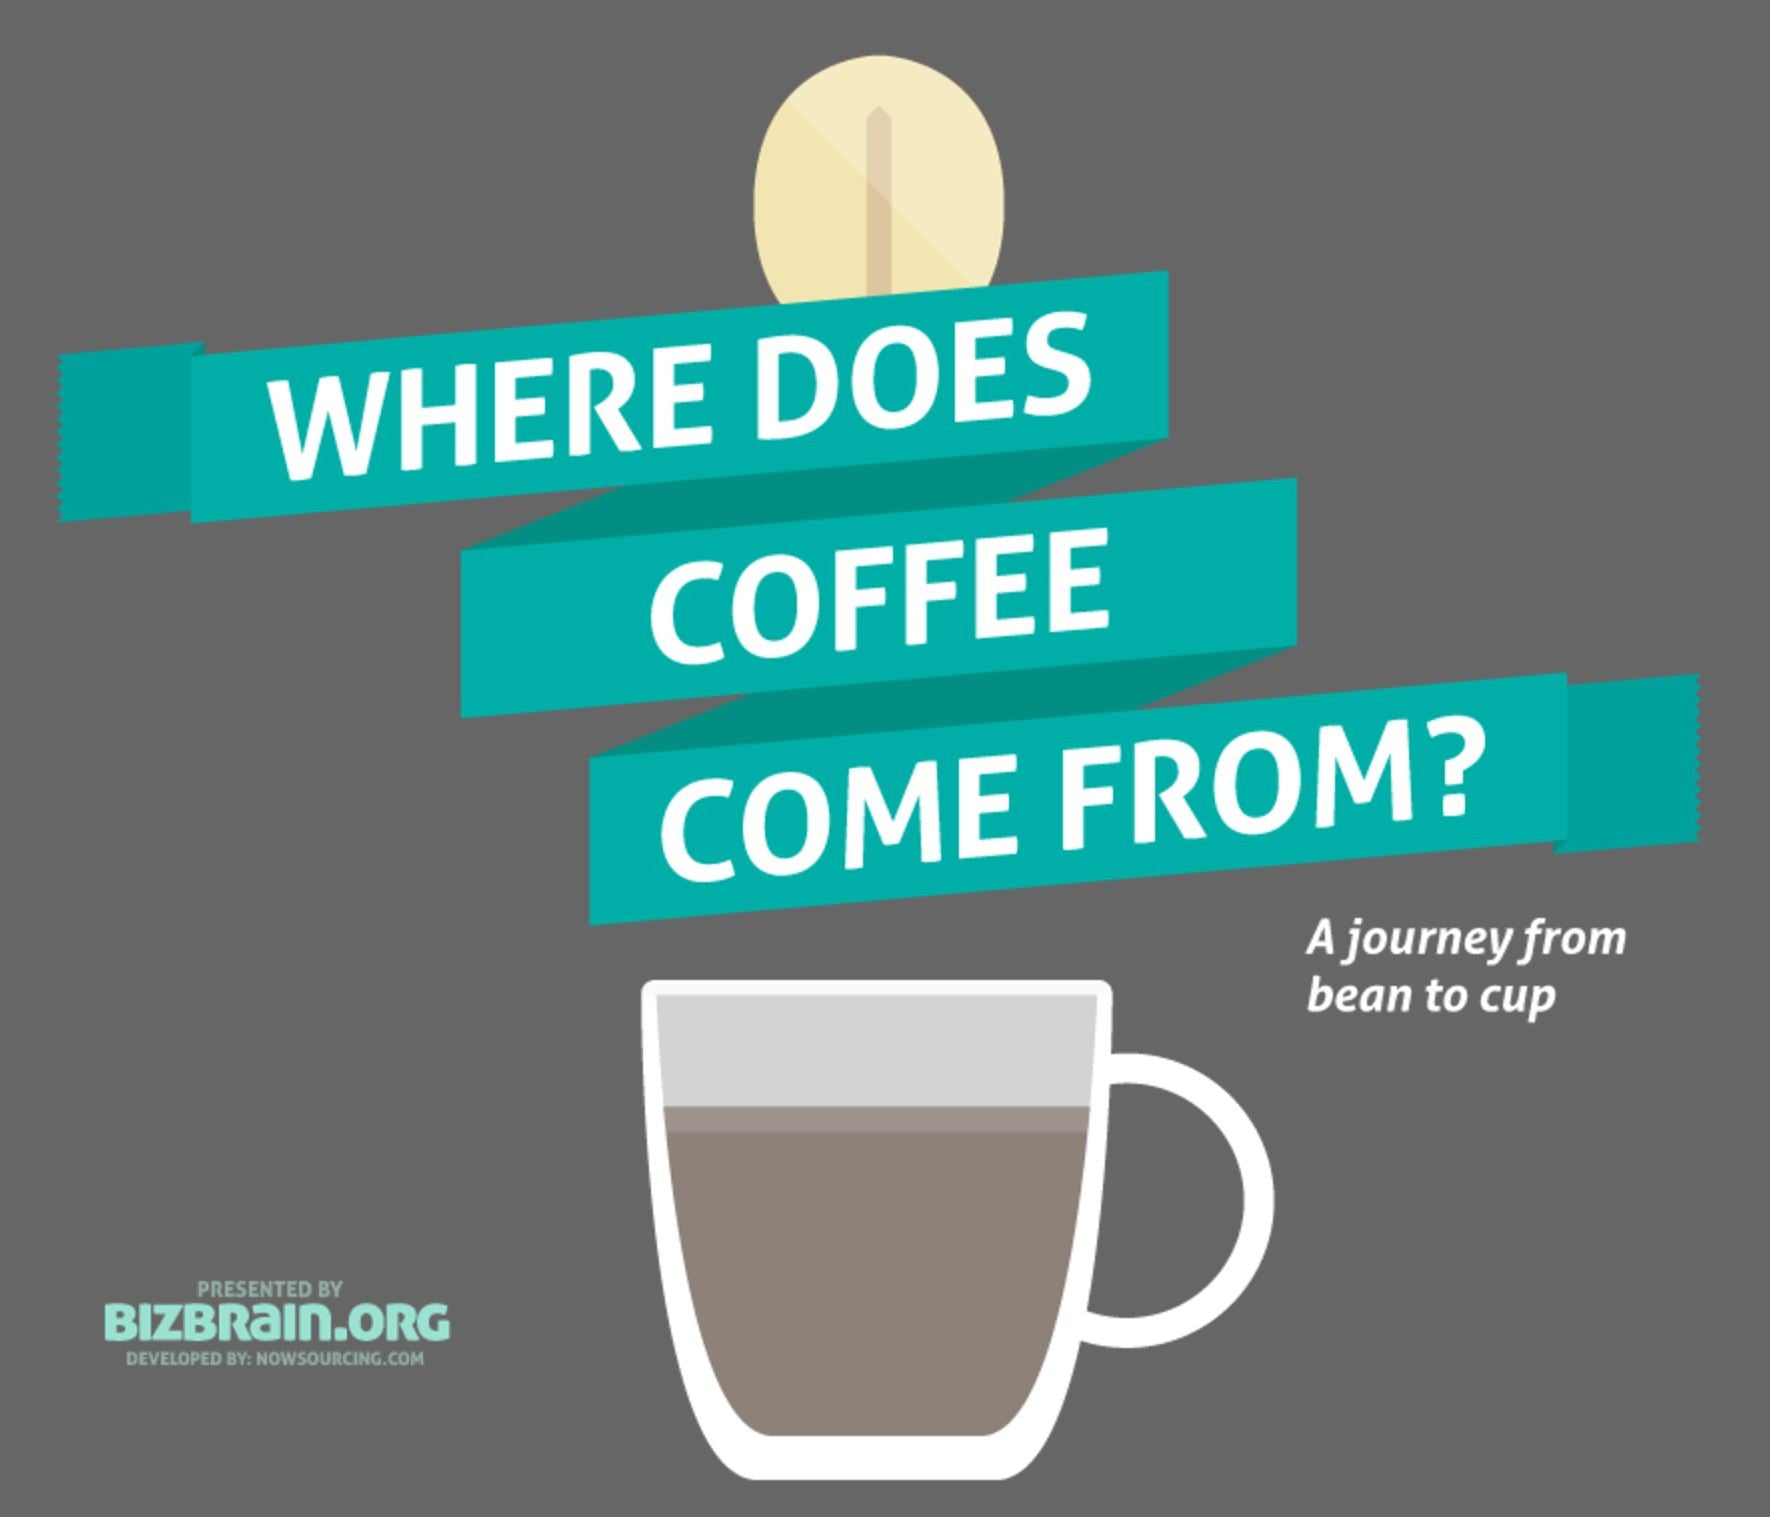 WHERE DOES COFFEE COME FROM ?